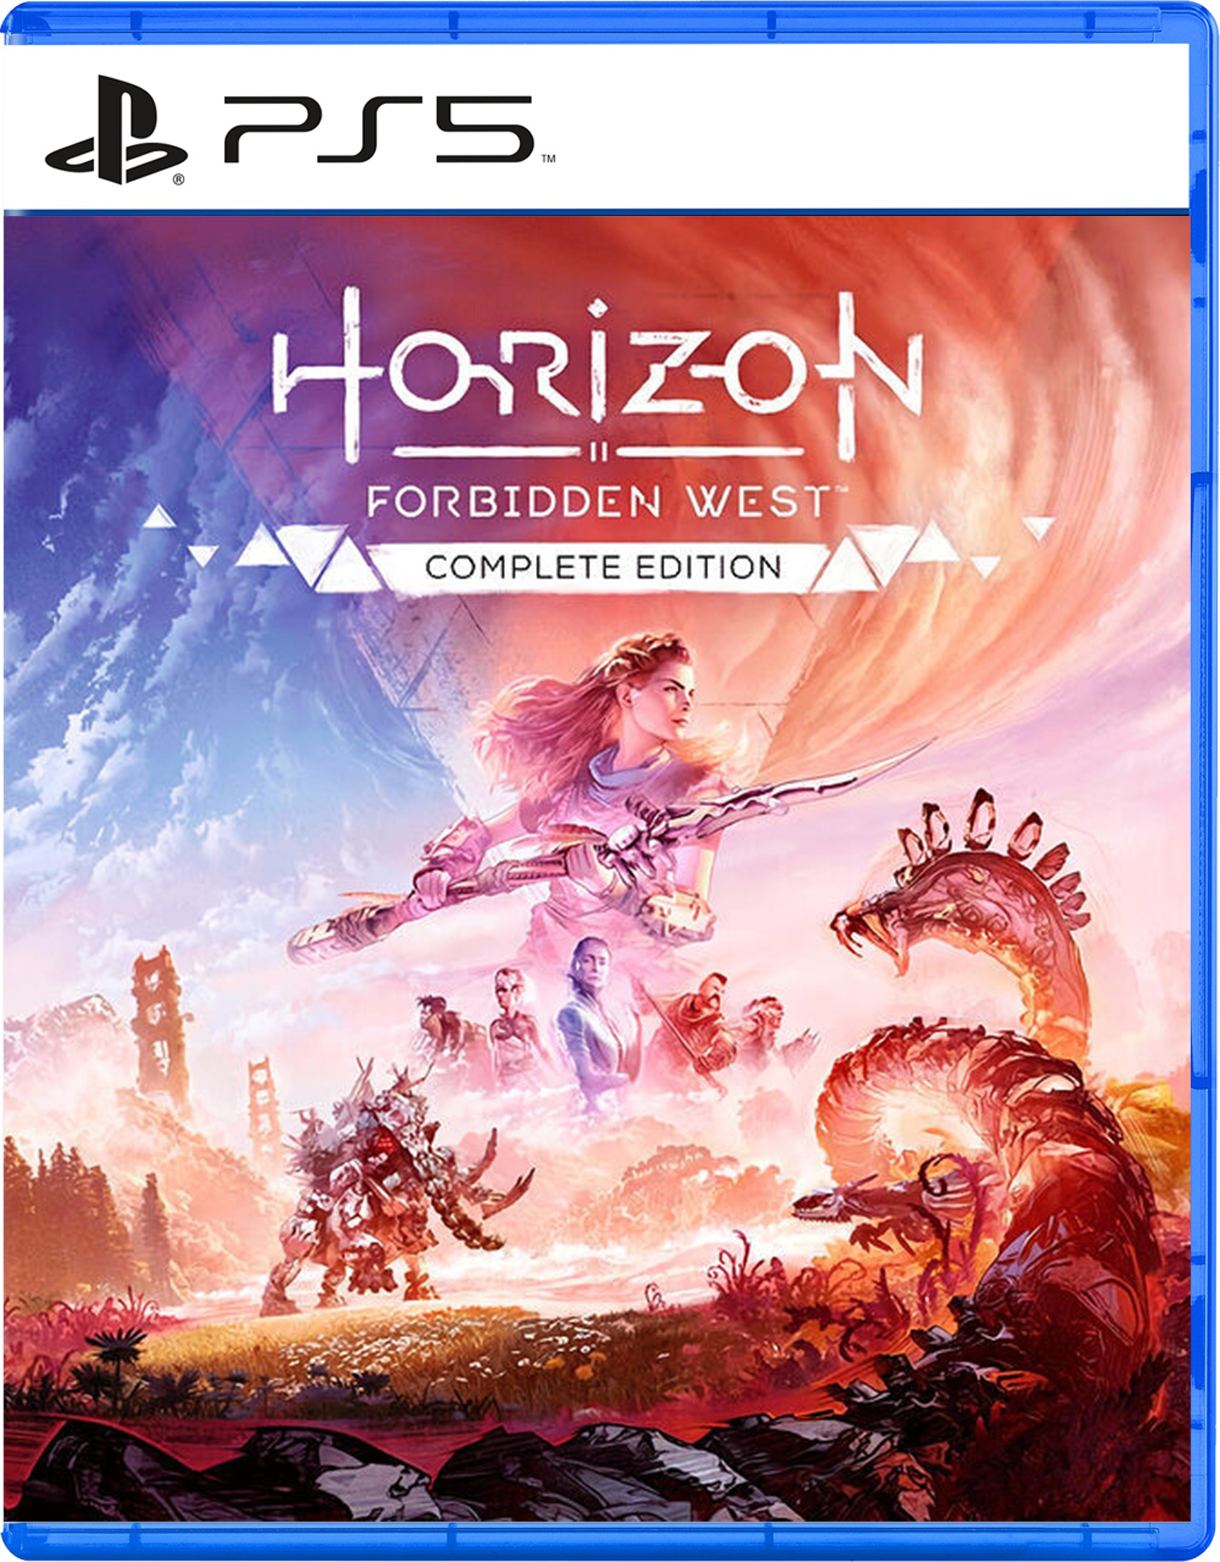 PS5 Video Games for $29.99 Each (Including Horizon Forbidden West